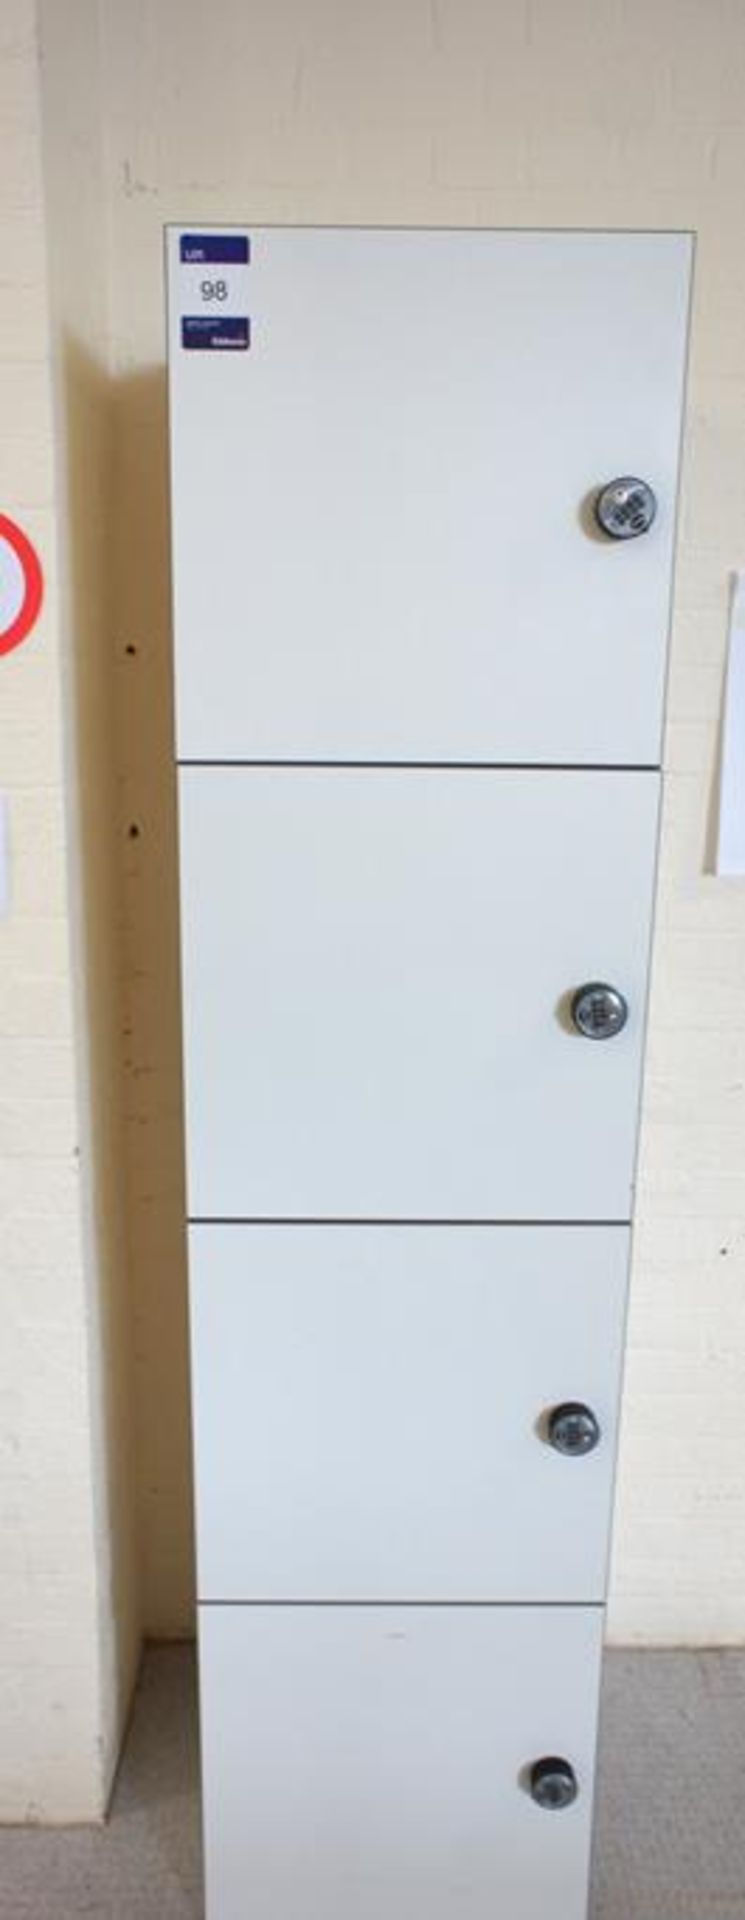 * 4 Compartment Cupboard with Lockkey Combination Locks Photographs are provided for example - Image 2 of 4